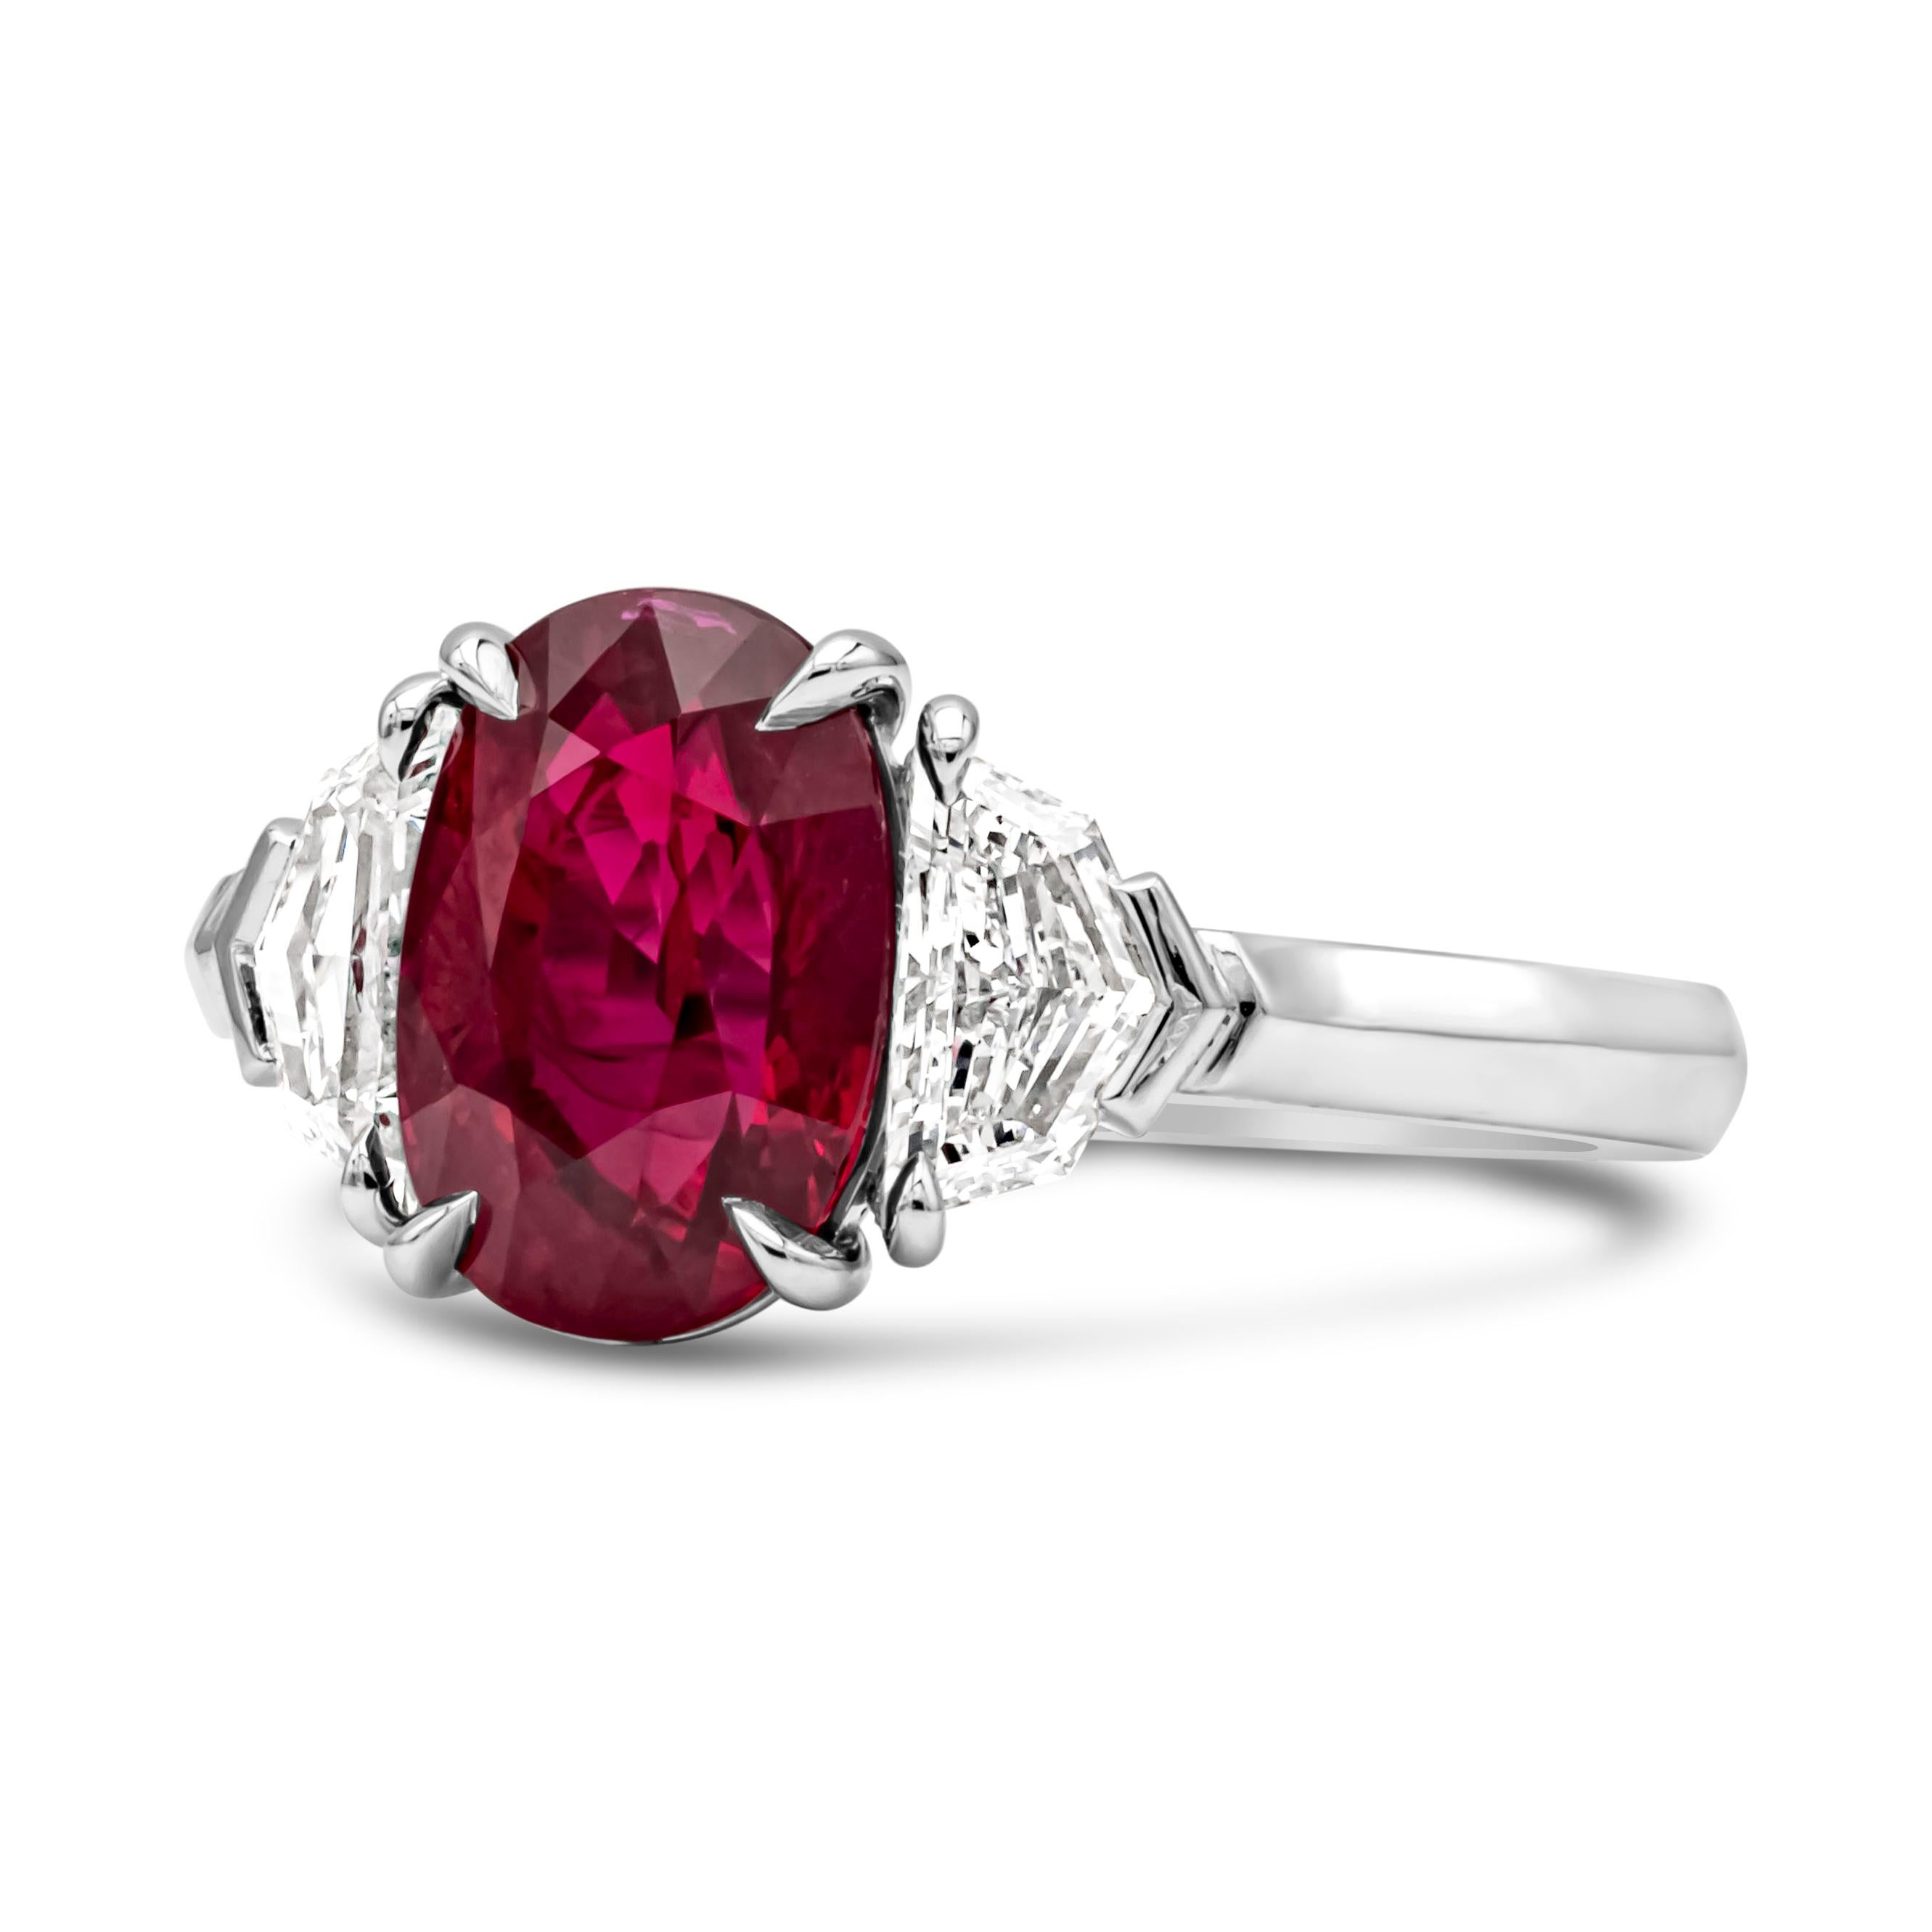 This wonderful and classic GRS certified three stone engagement ring showcasing a 3.03 carats oval cut brilliant Burmese ruby, set in a timeless four prong basket setting. Flanked by one diamond on each side weighing 0.79 carats total, D-E Color and